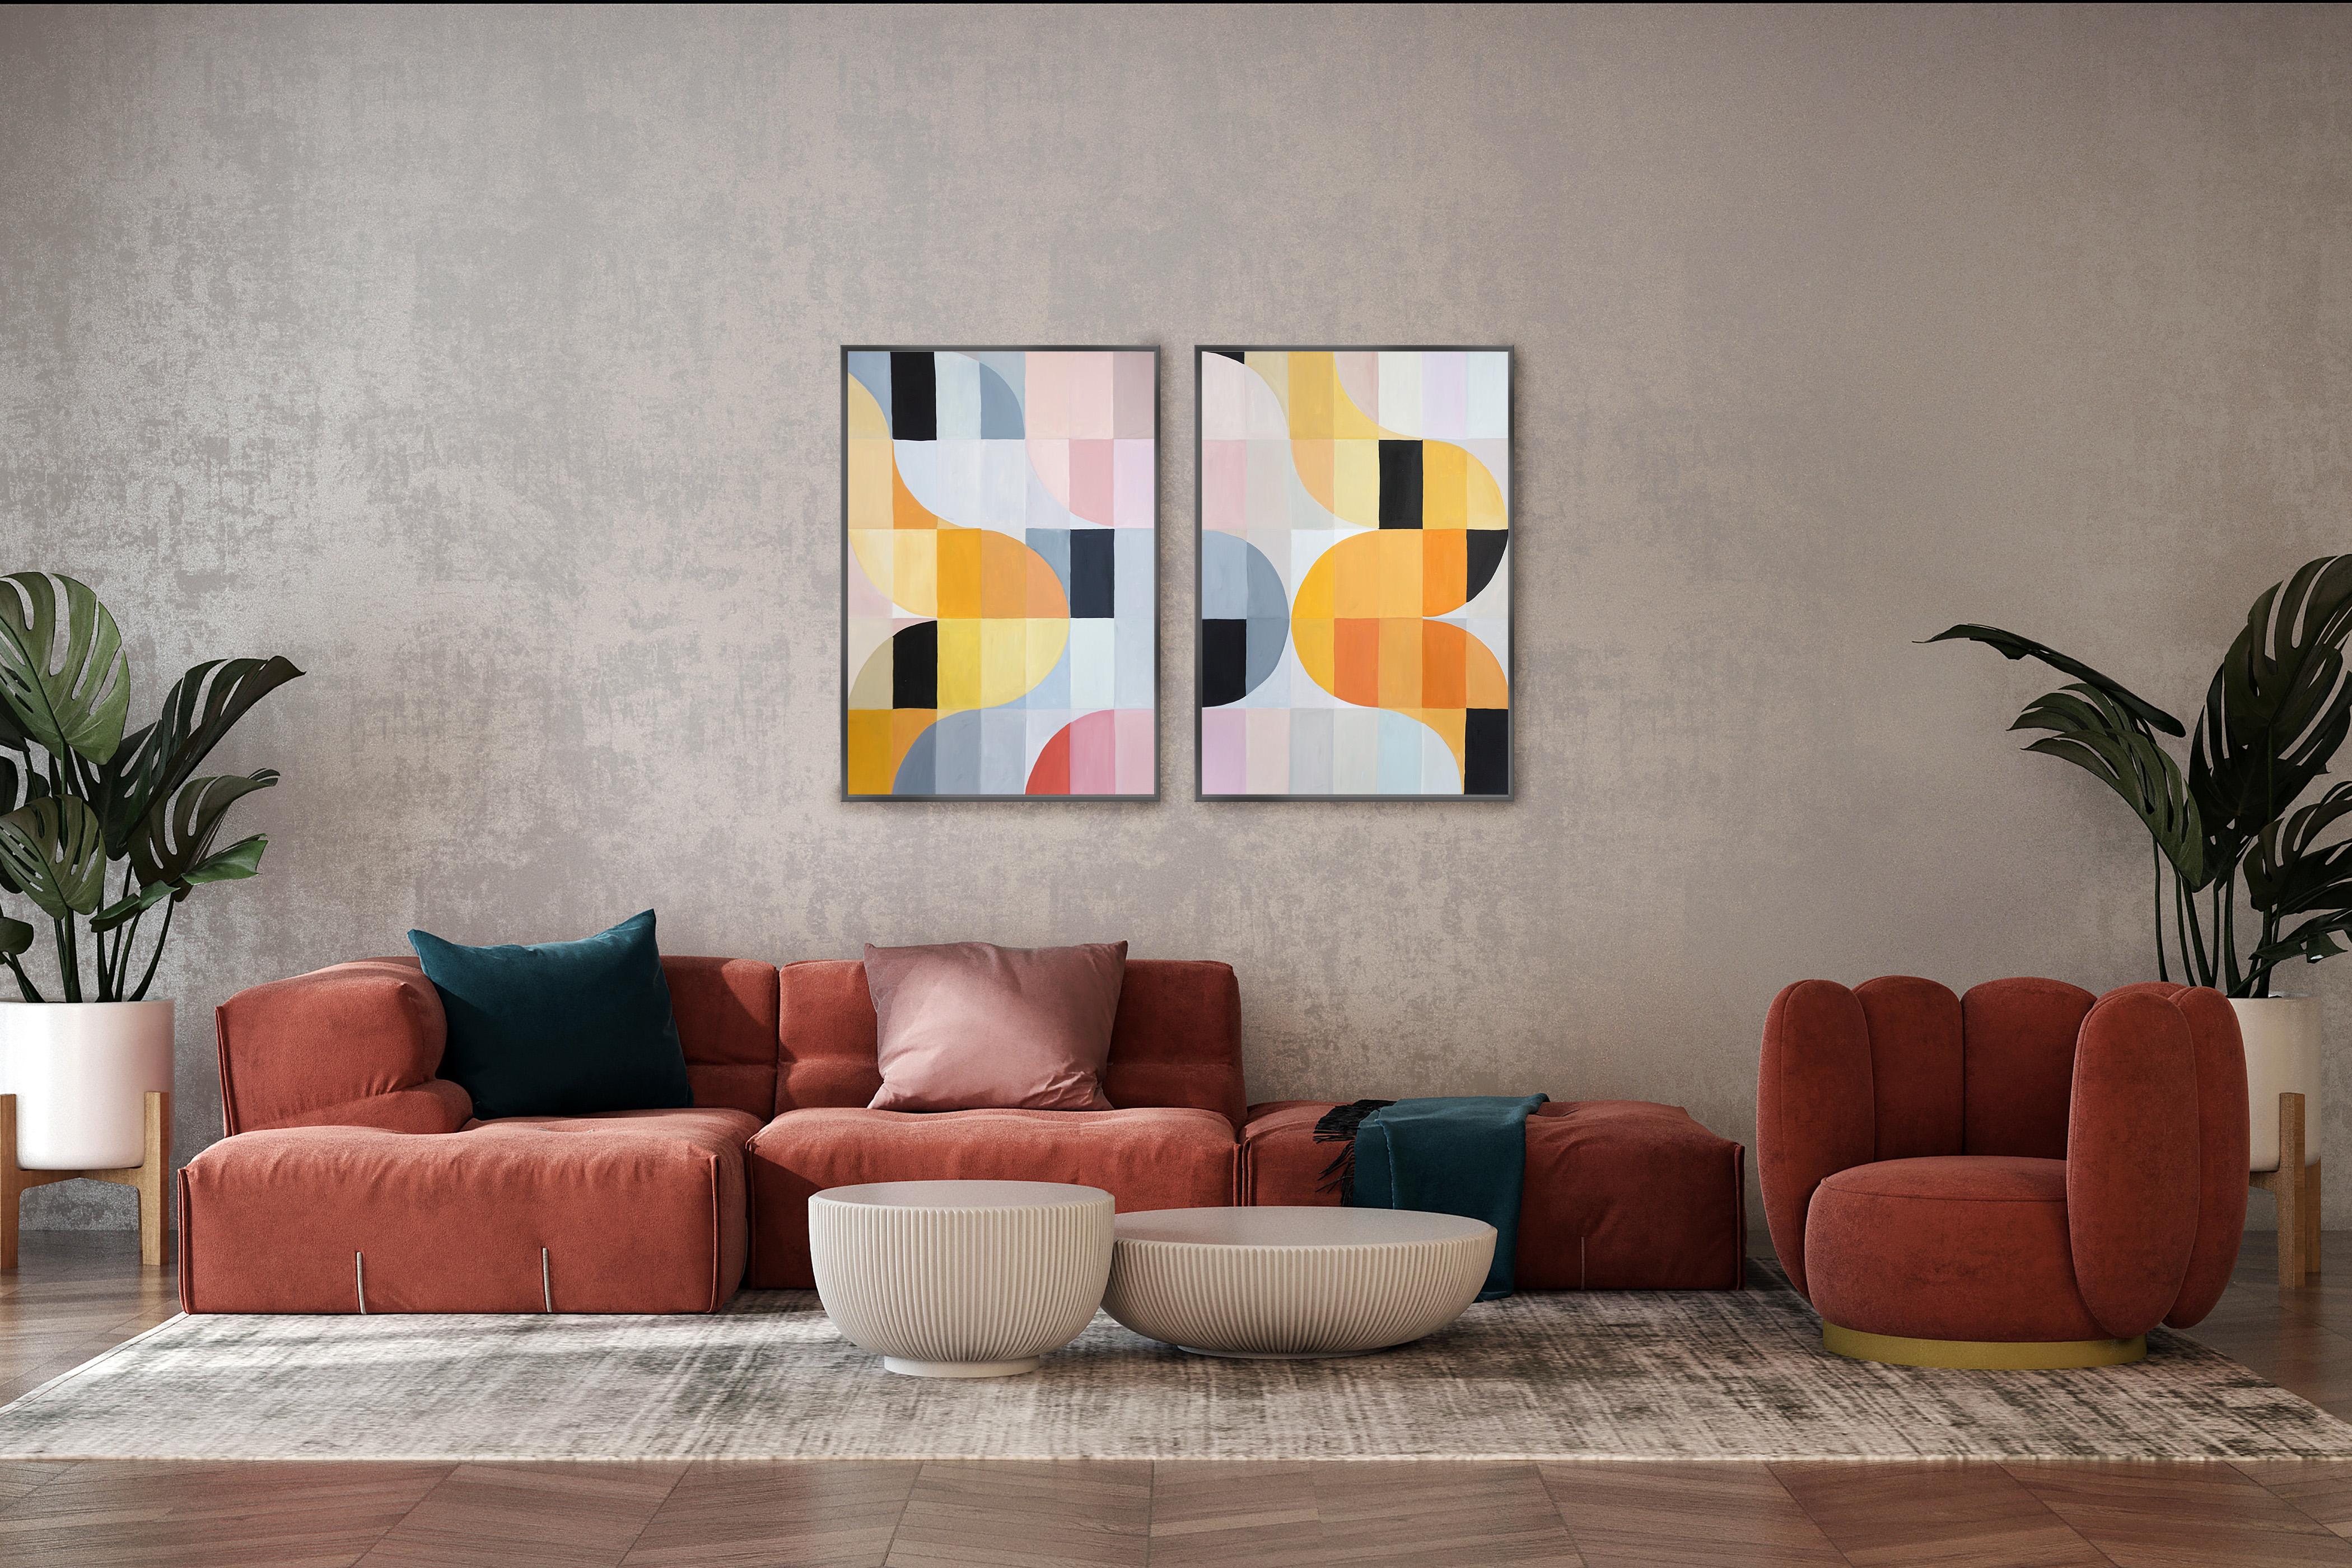 Parenthesis Grid Diptych, Geometric Bauhaus Tiles in Yellow & Gray, Soft Pink   - Painting by Natalia Roman